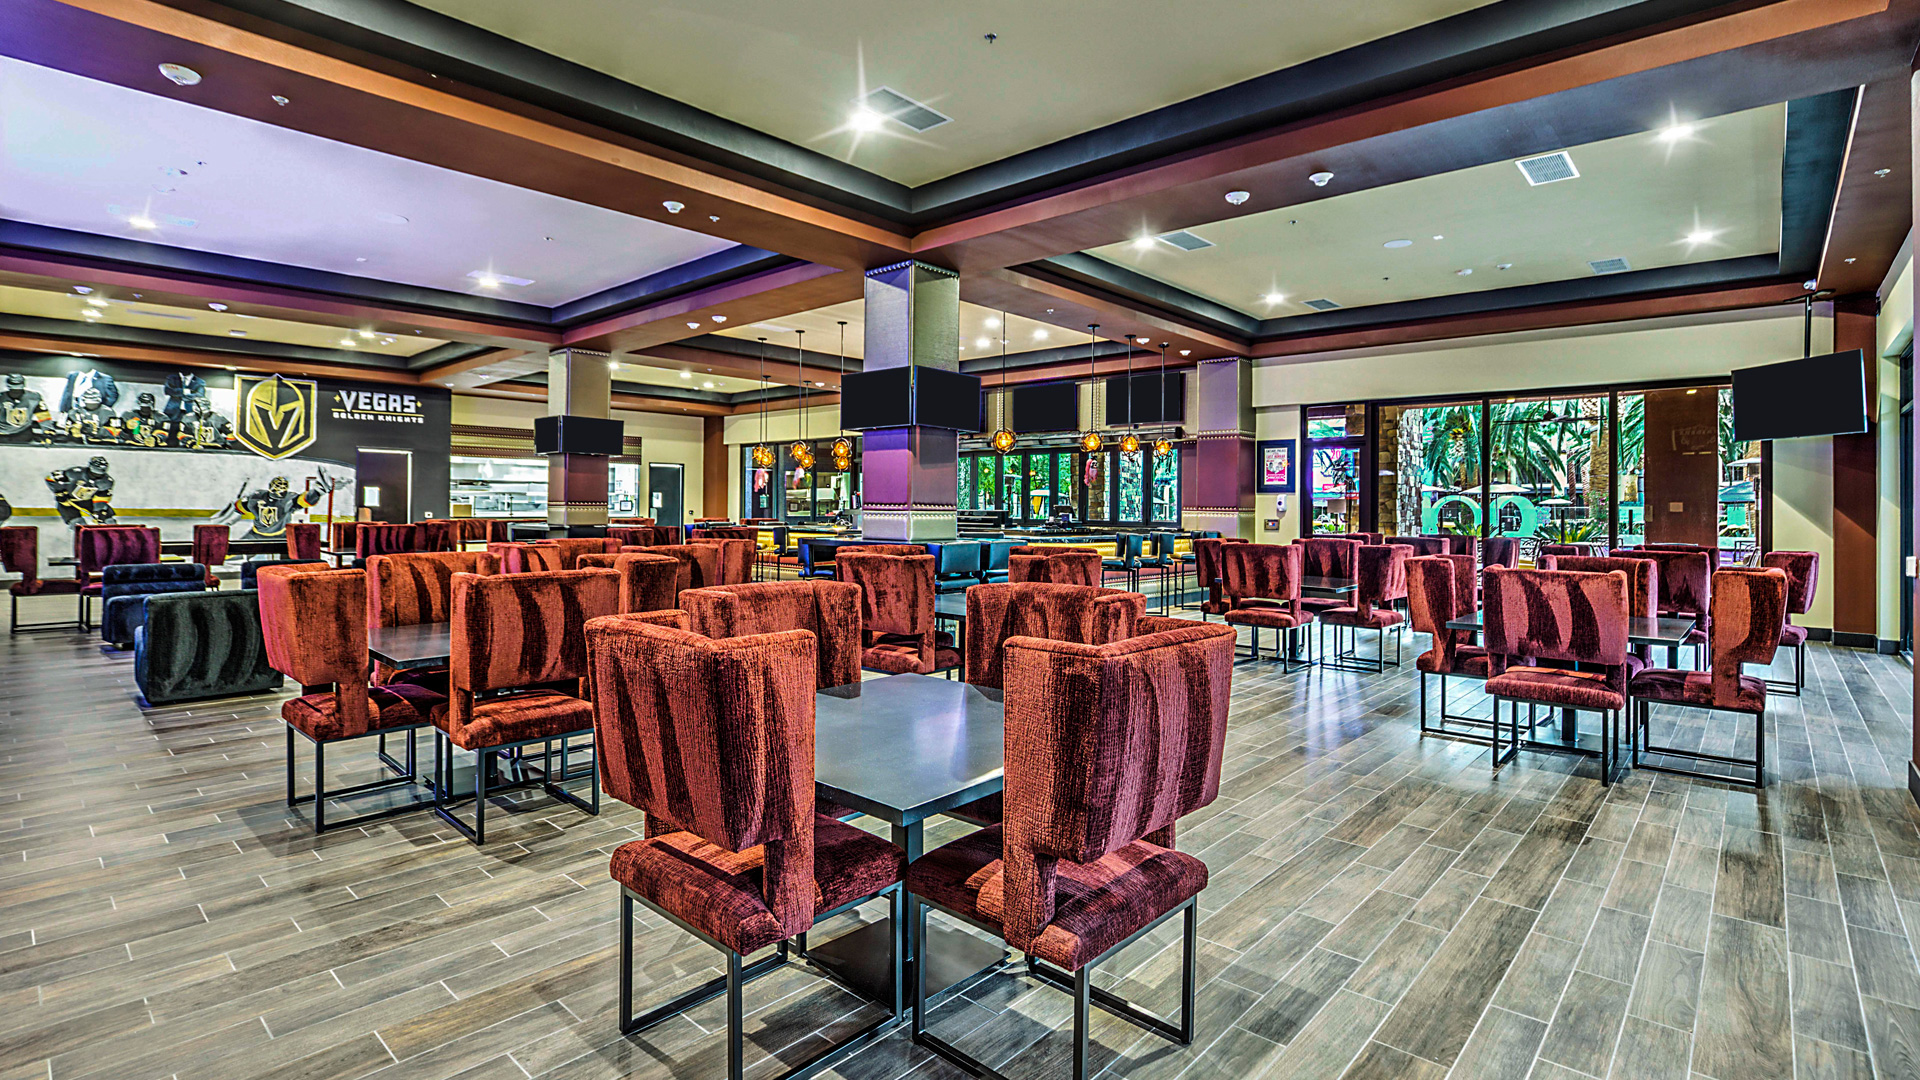 Scotty's restaurant interior with seating